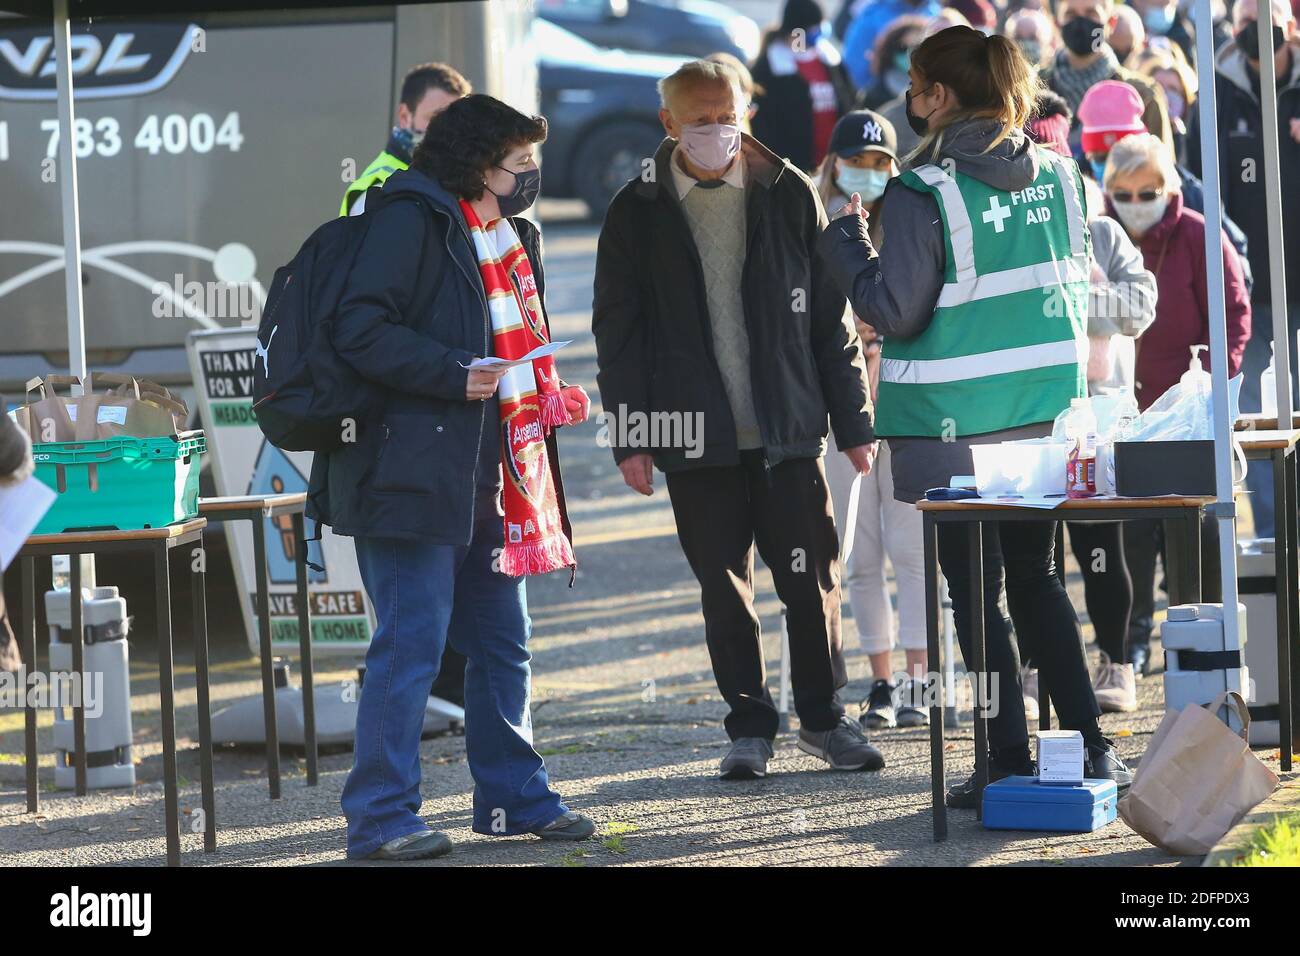 Football supporters having covid 19 temperature check on entry, UK Stock Photo